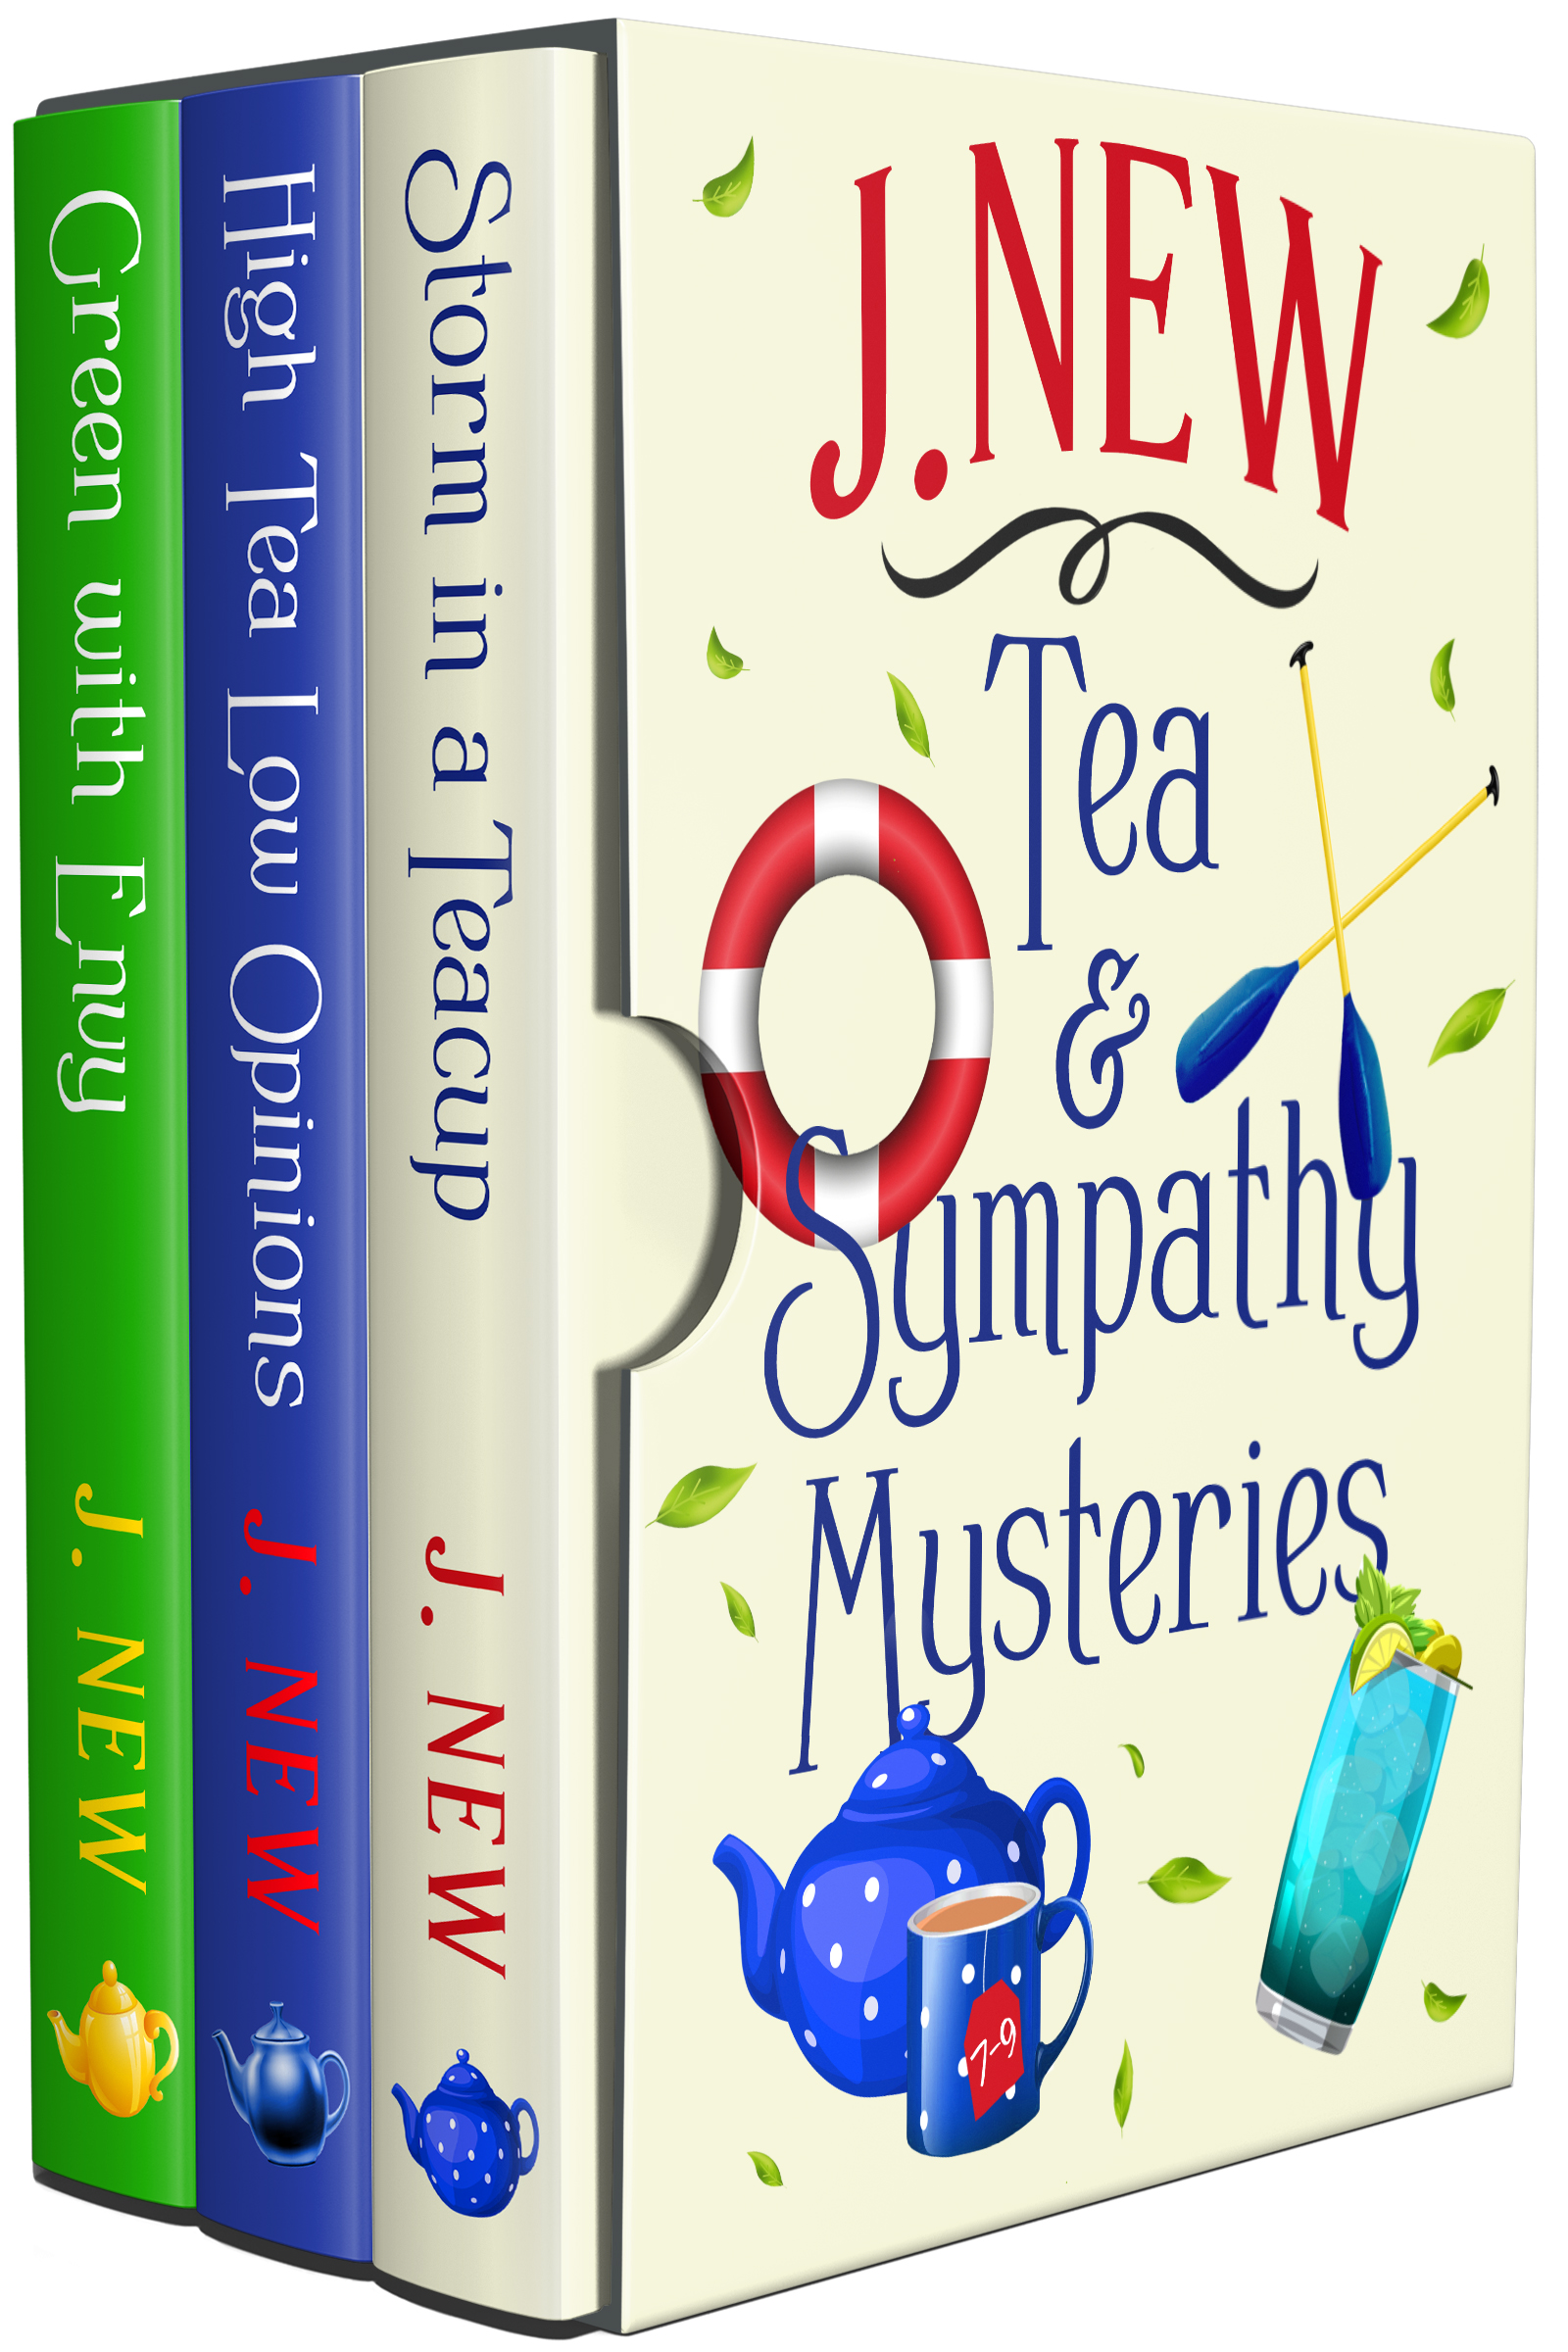 The Third boxset of the popular Tea and Sympathy Mysteries by J New Containing books 7 8 and 9 available from Amazon, Barnes and Noble and Waterstones in ebook and print